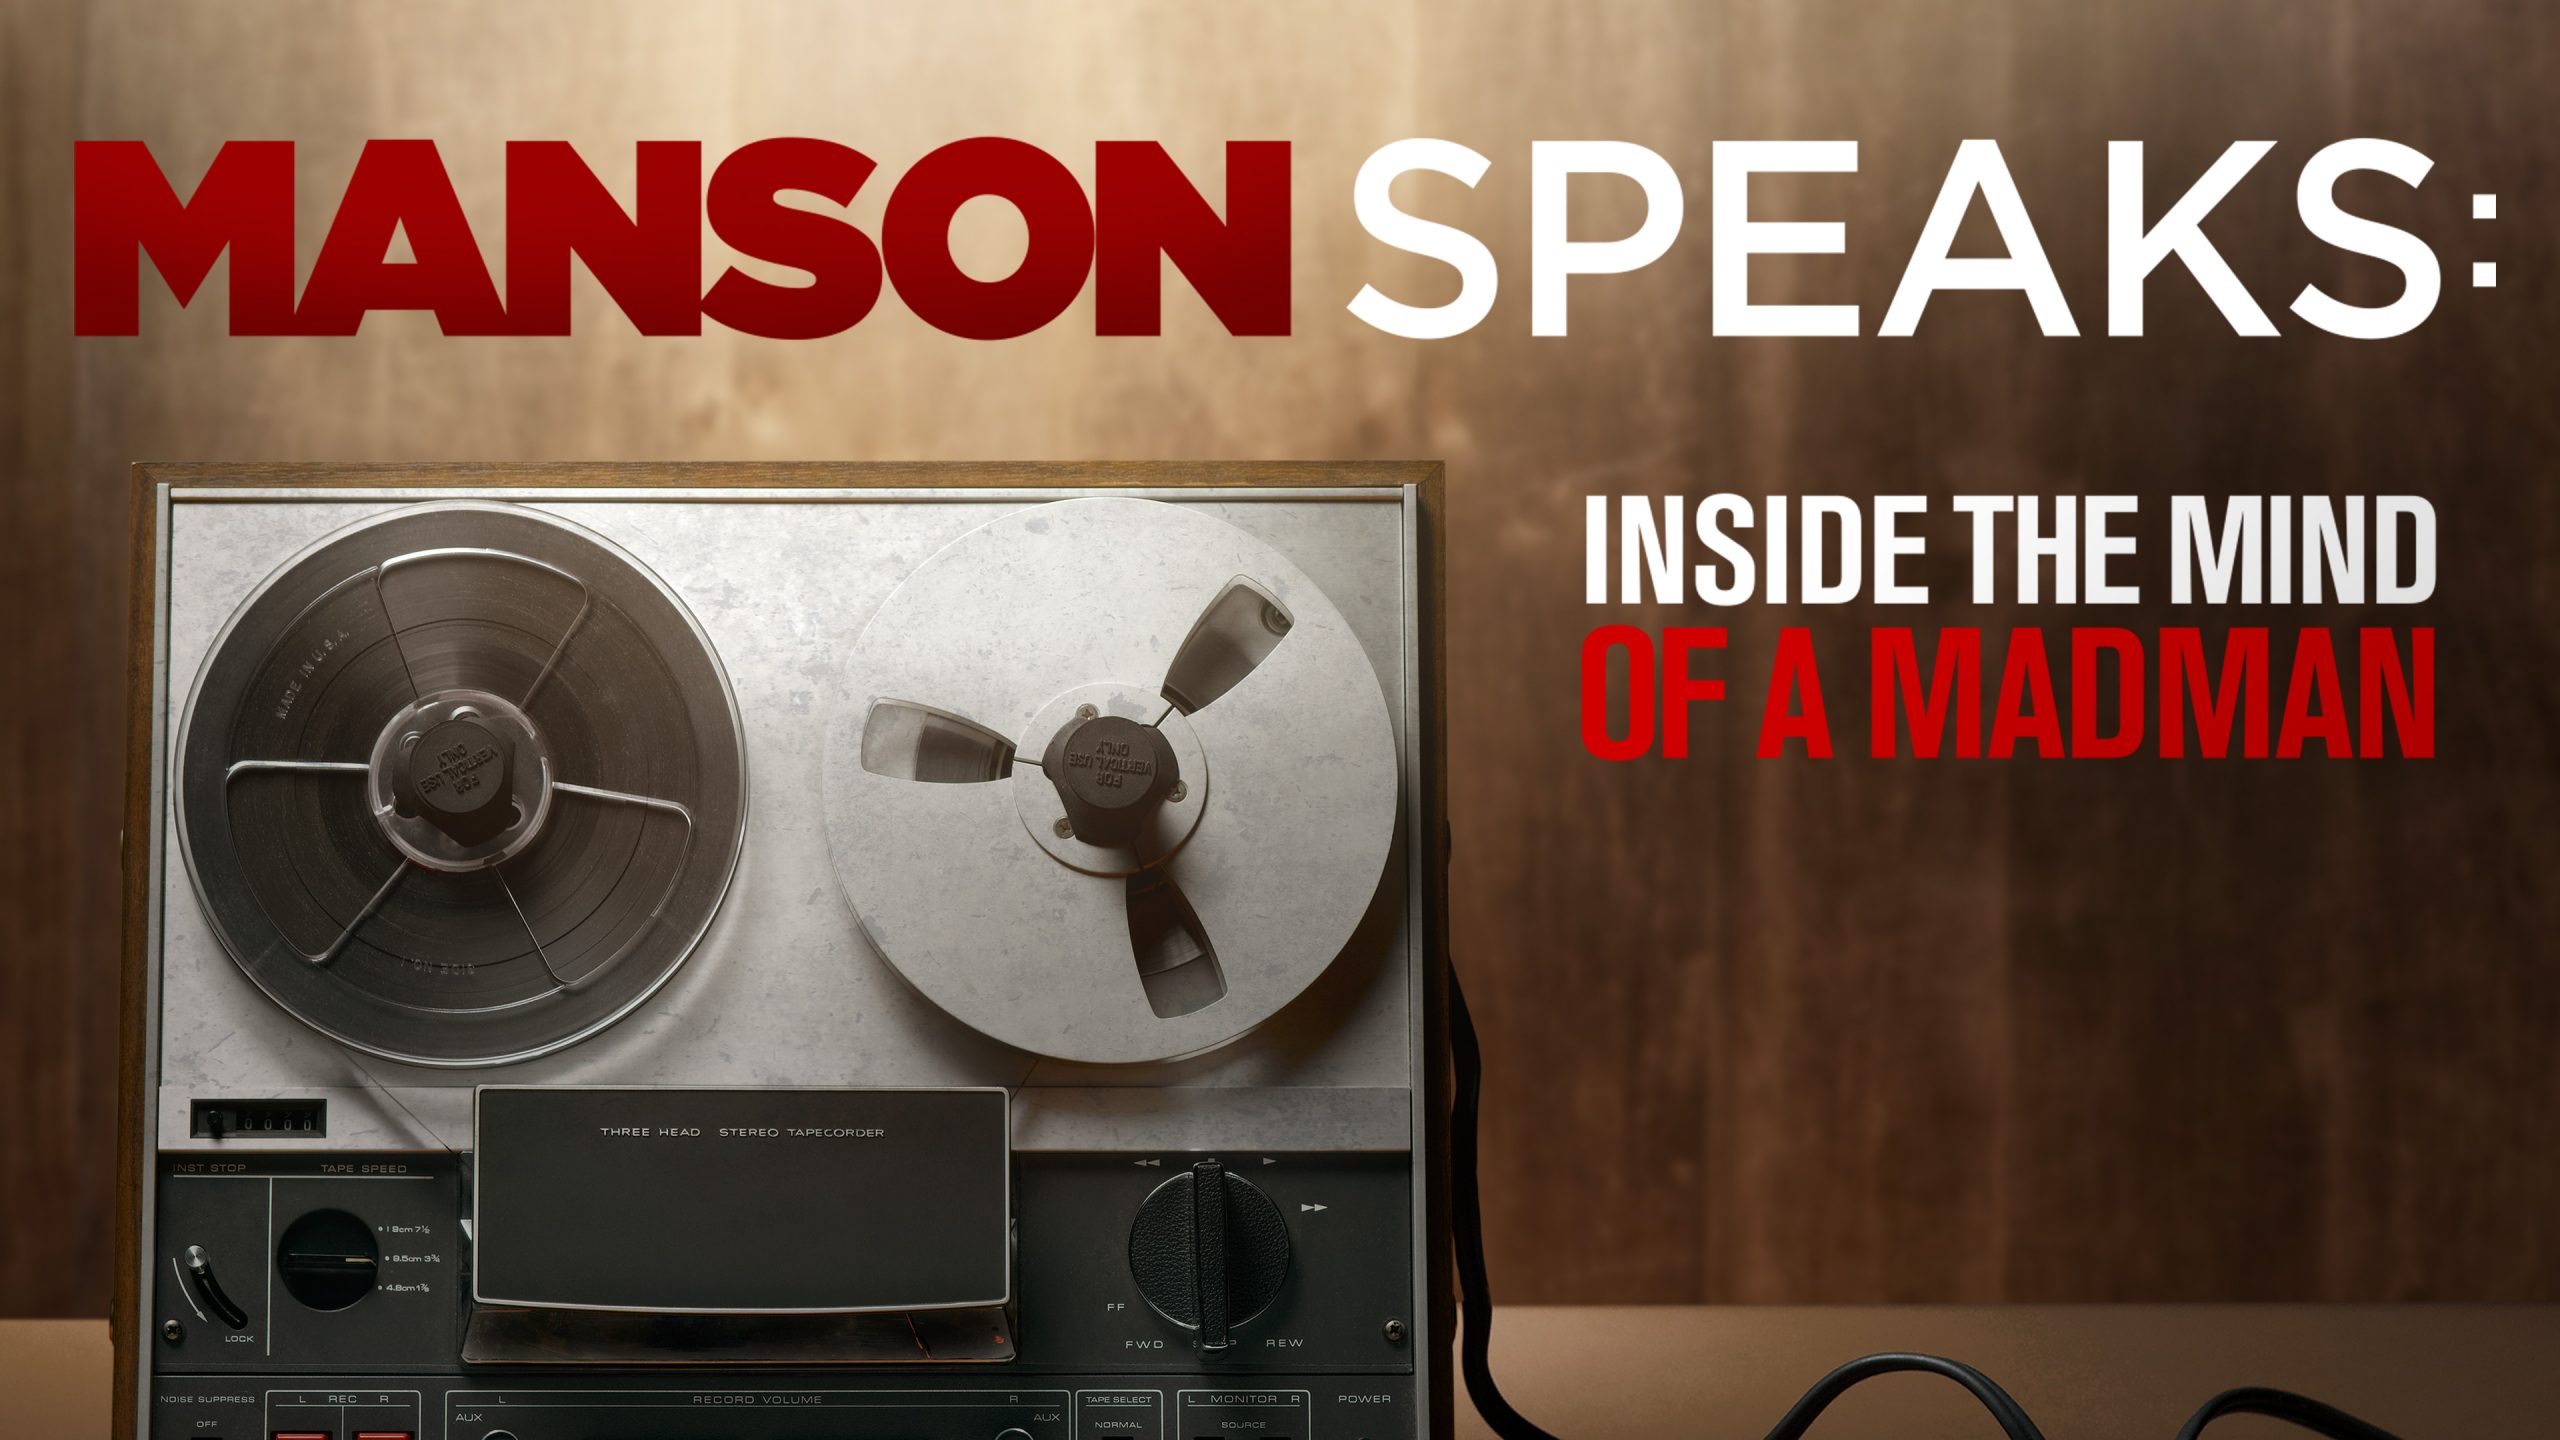 Watch 'Manson Speaks: Inside the Mind of a Madman' on HISTORY Vault